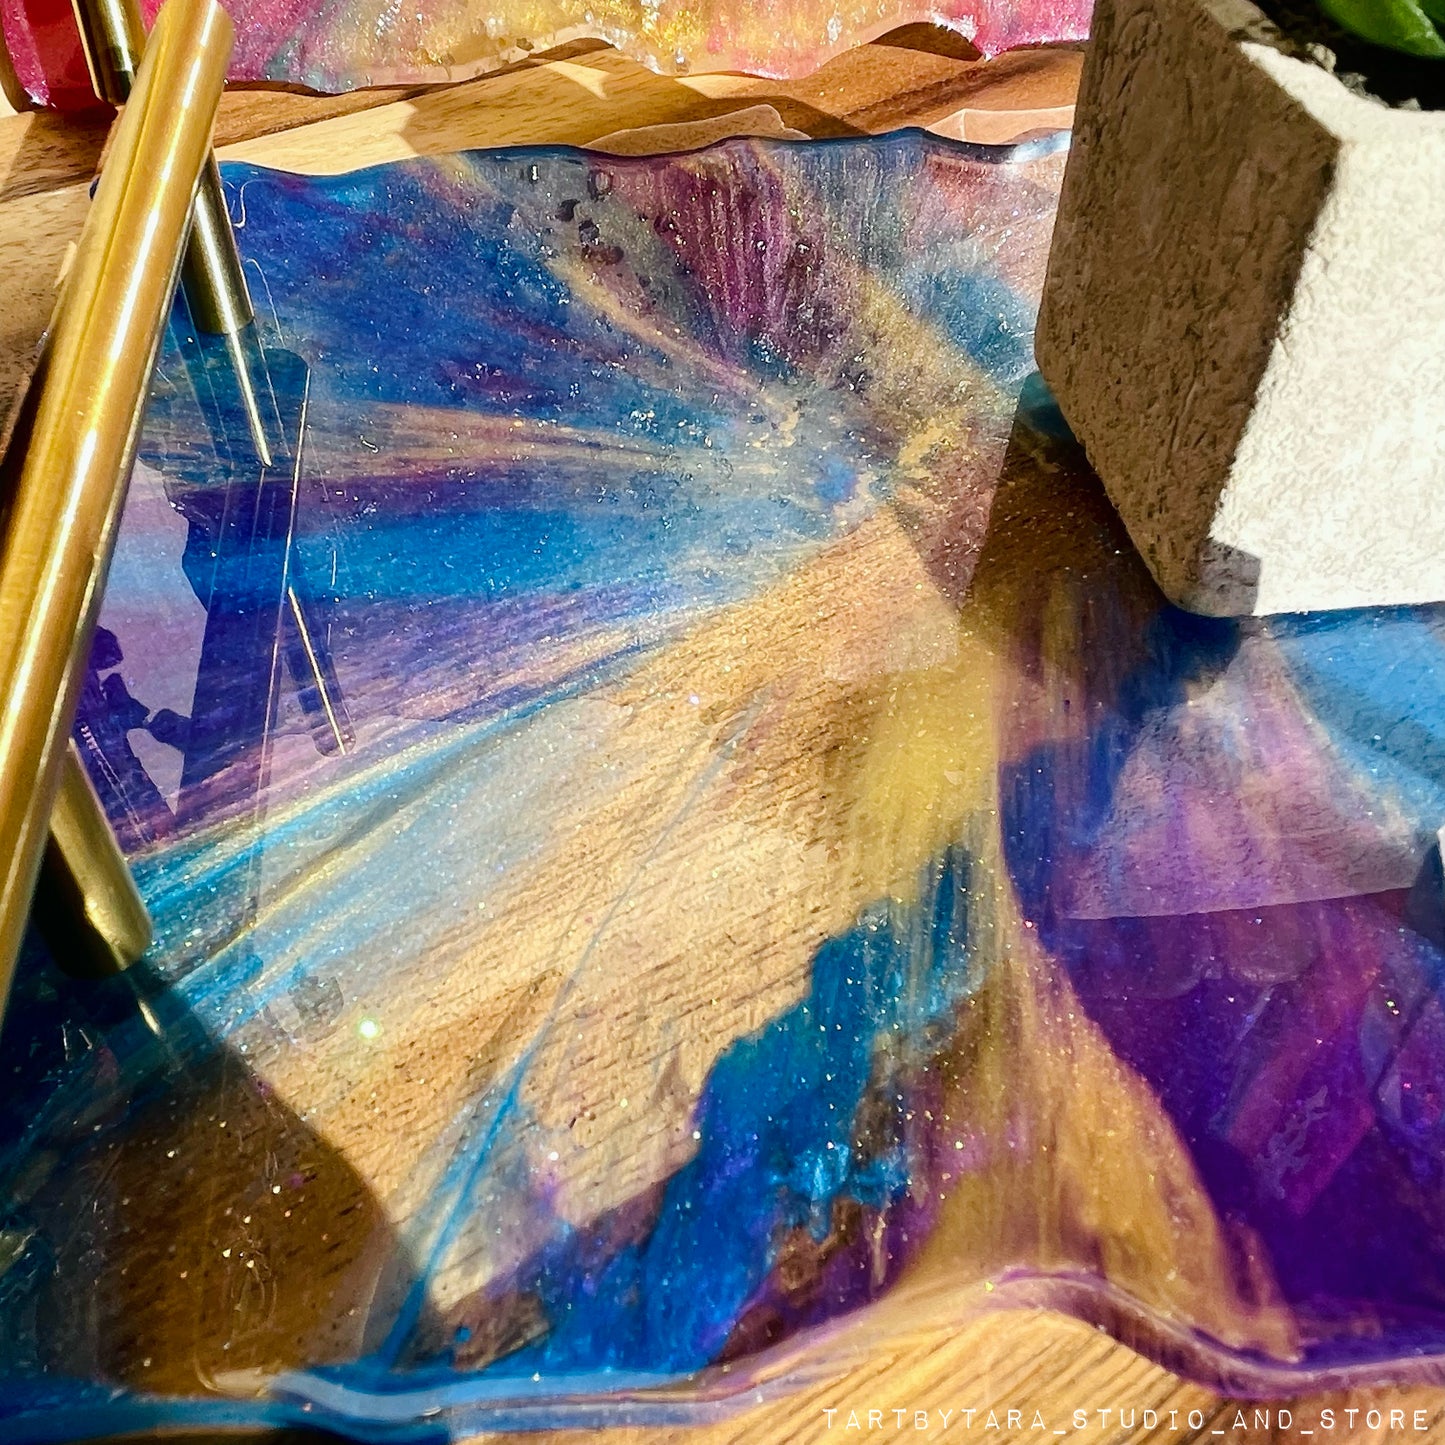 Geode tray Class - Wednesday- 1/31 @ 6pm